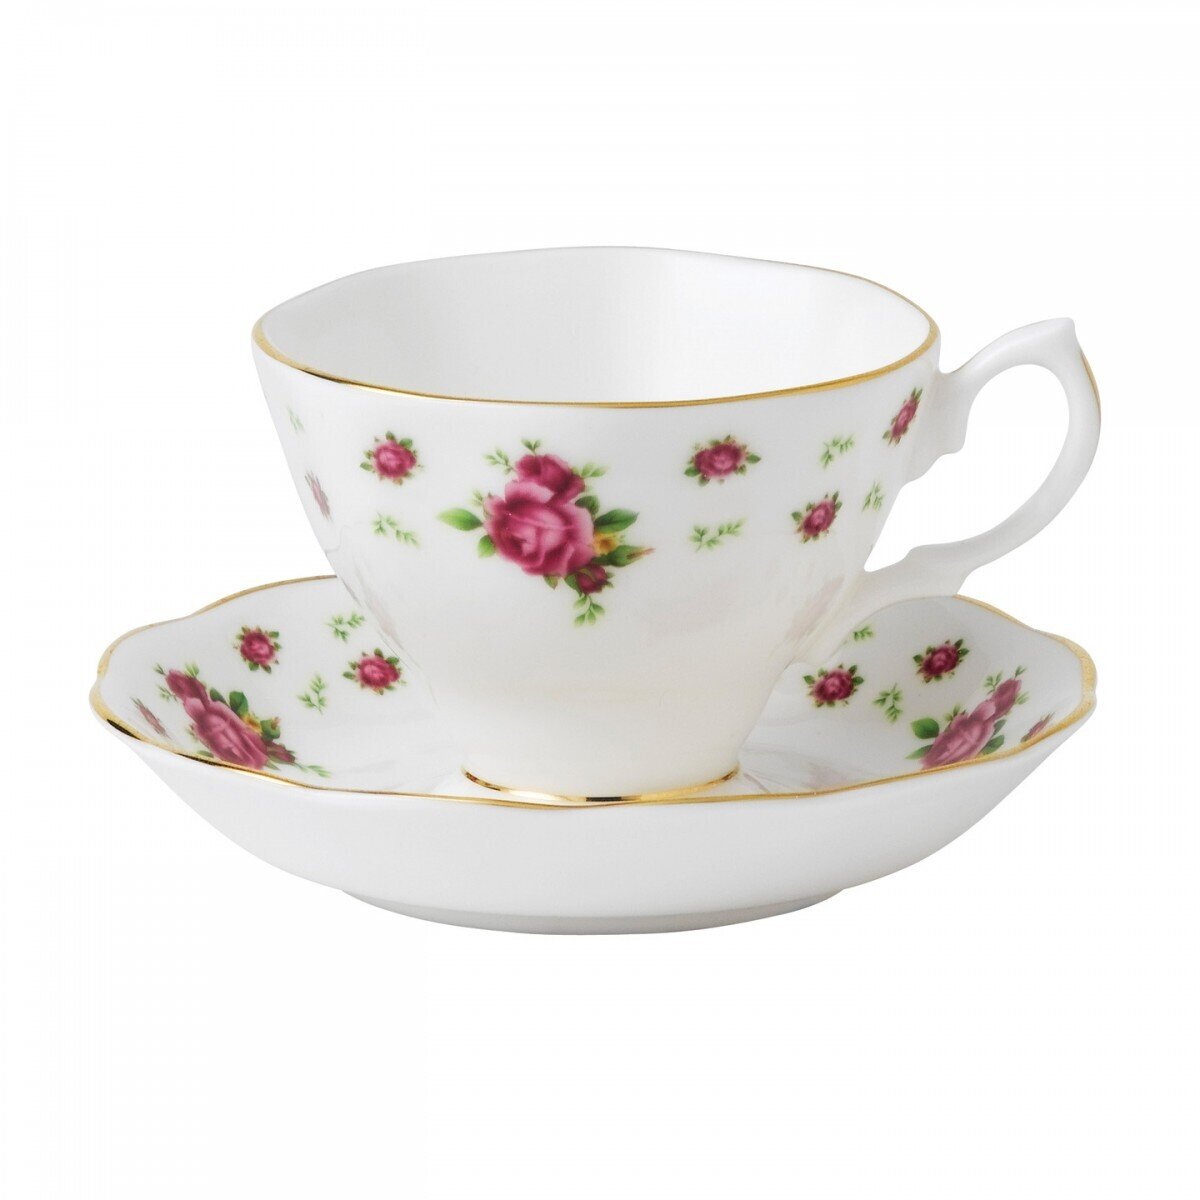 Royal Albert New Country Roses White Vintage Teacup & Saucer Set